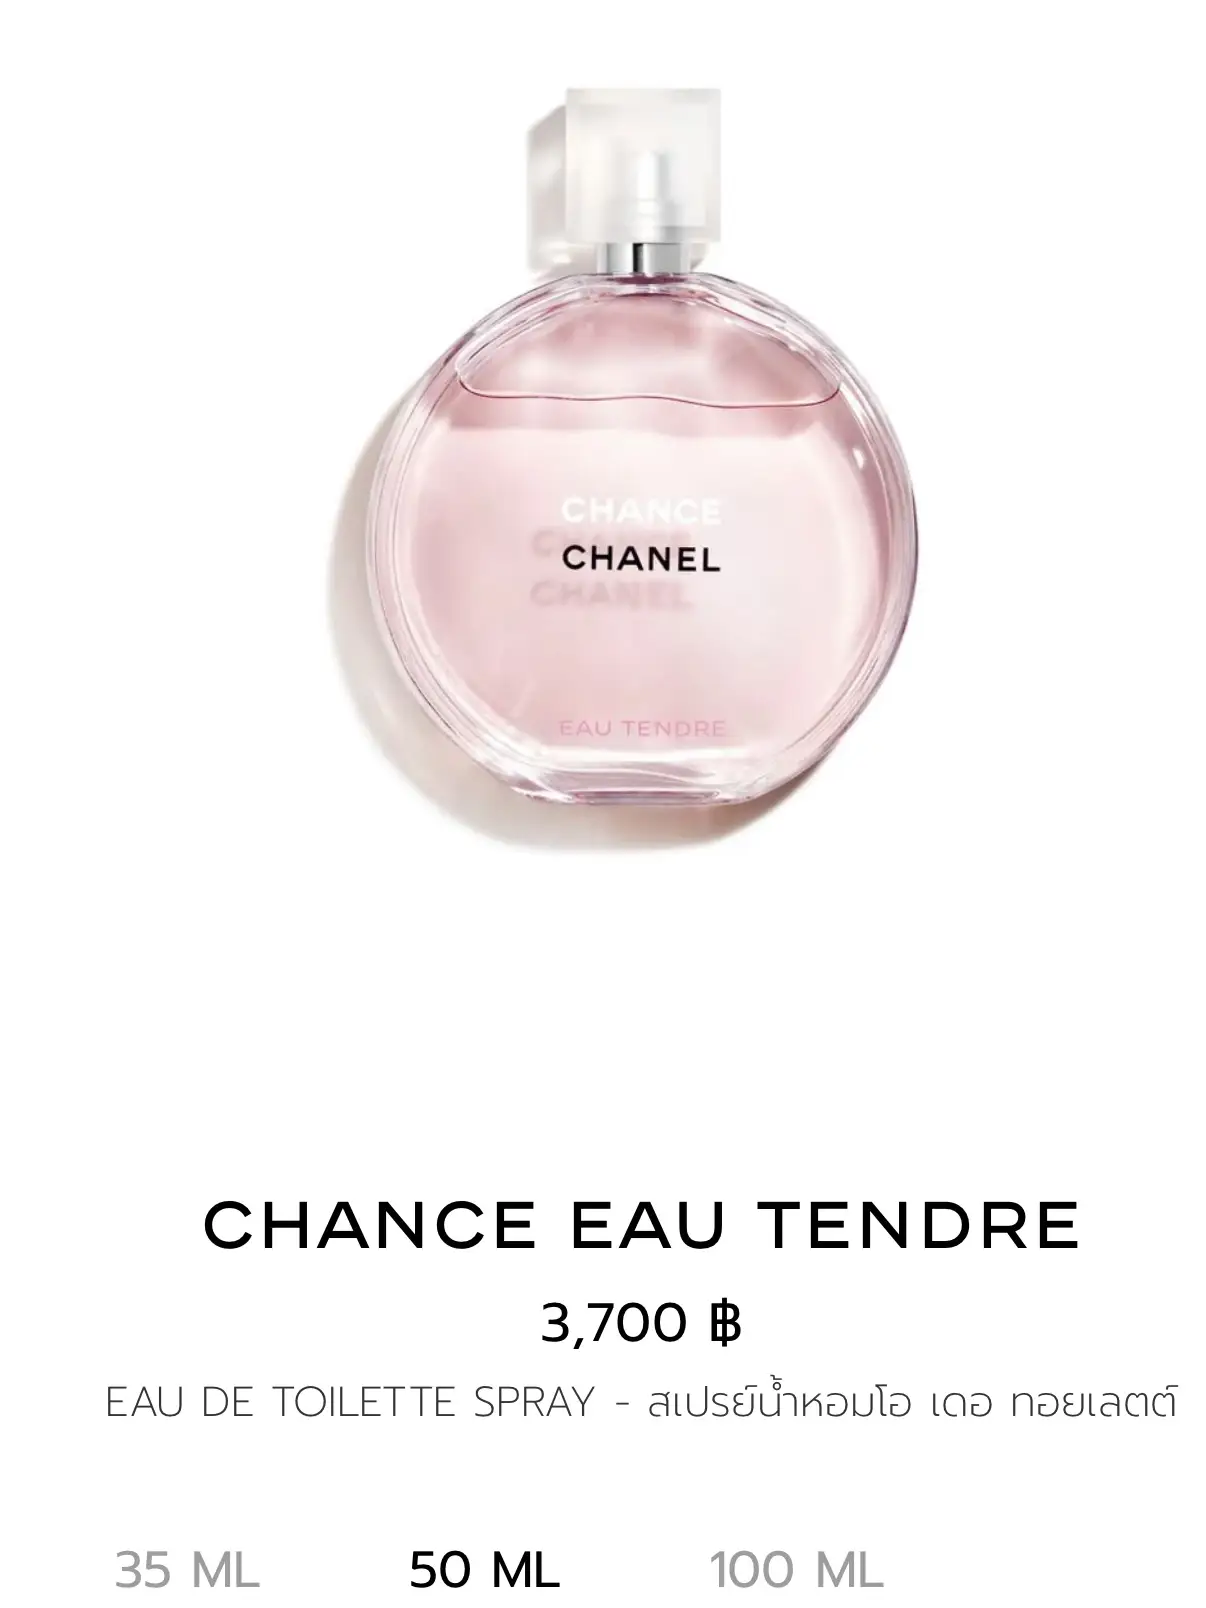 Review of Chanel Chance Eau Tendre💗